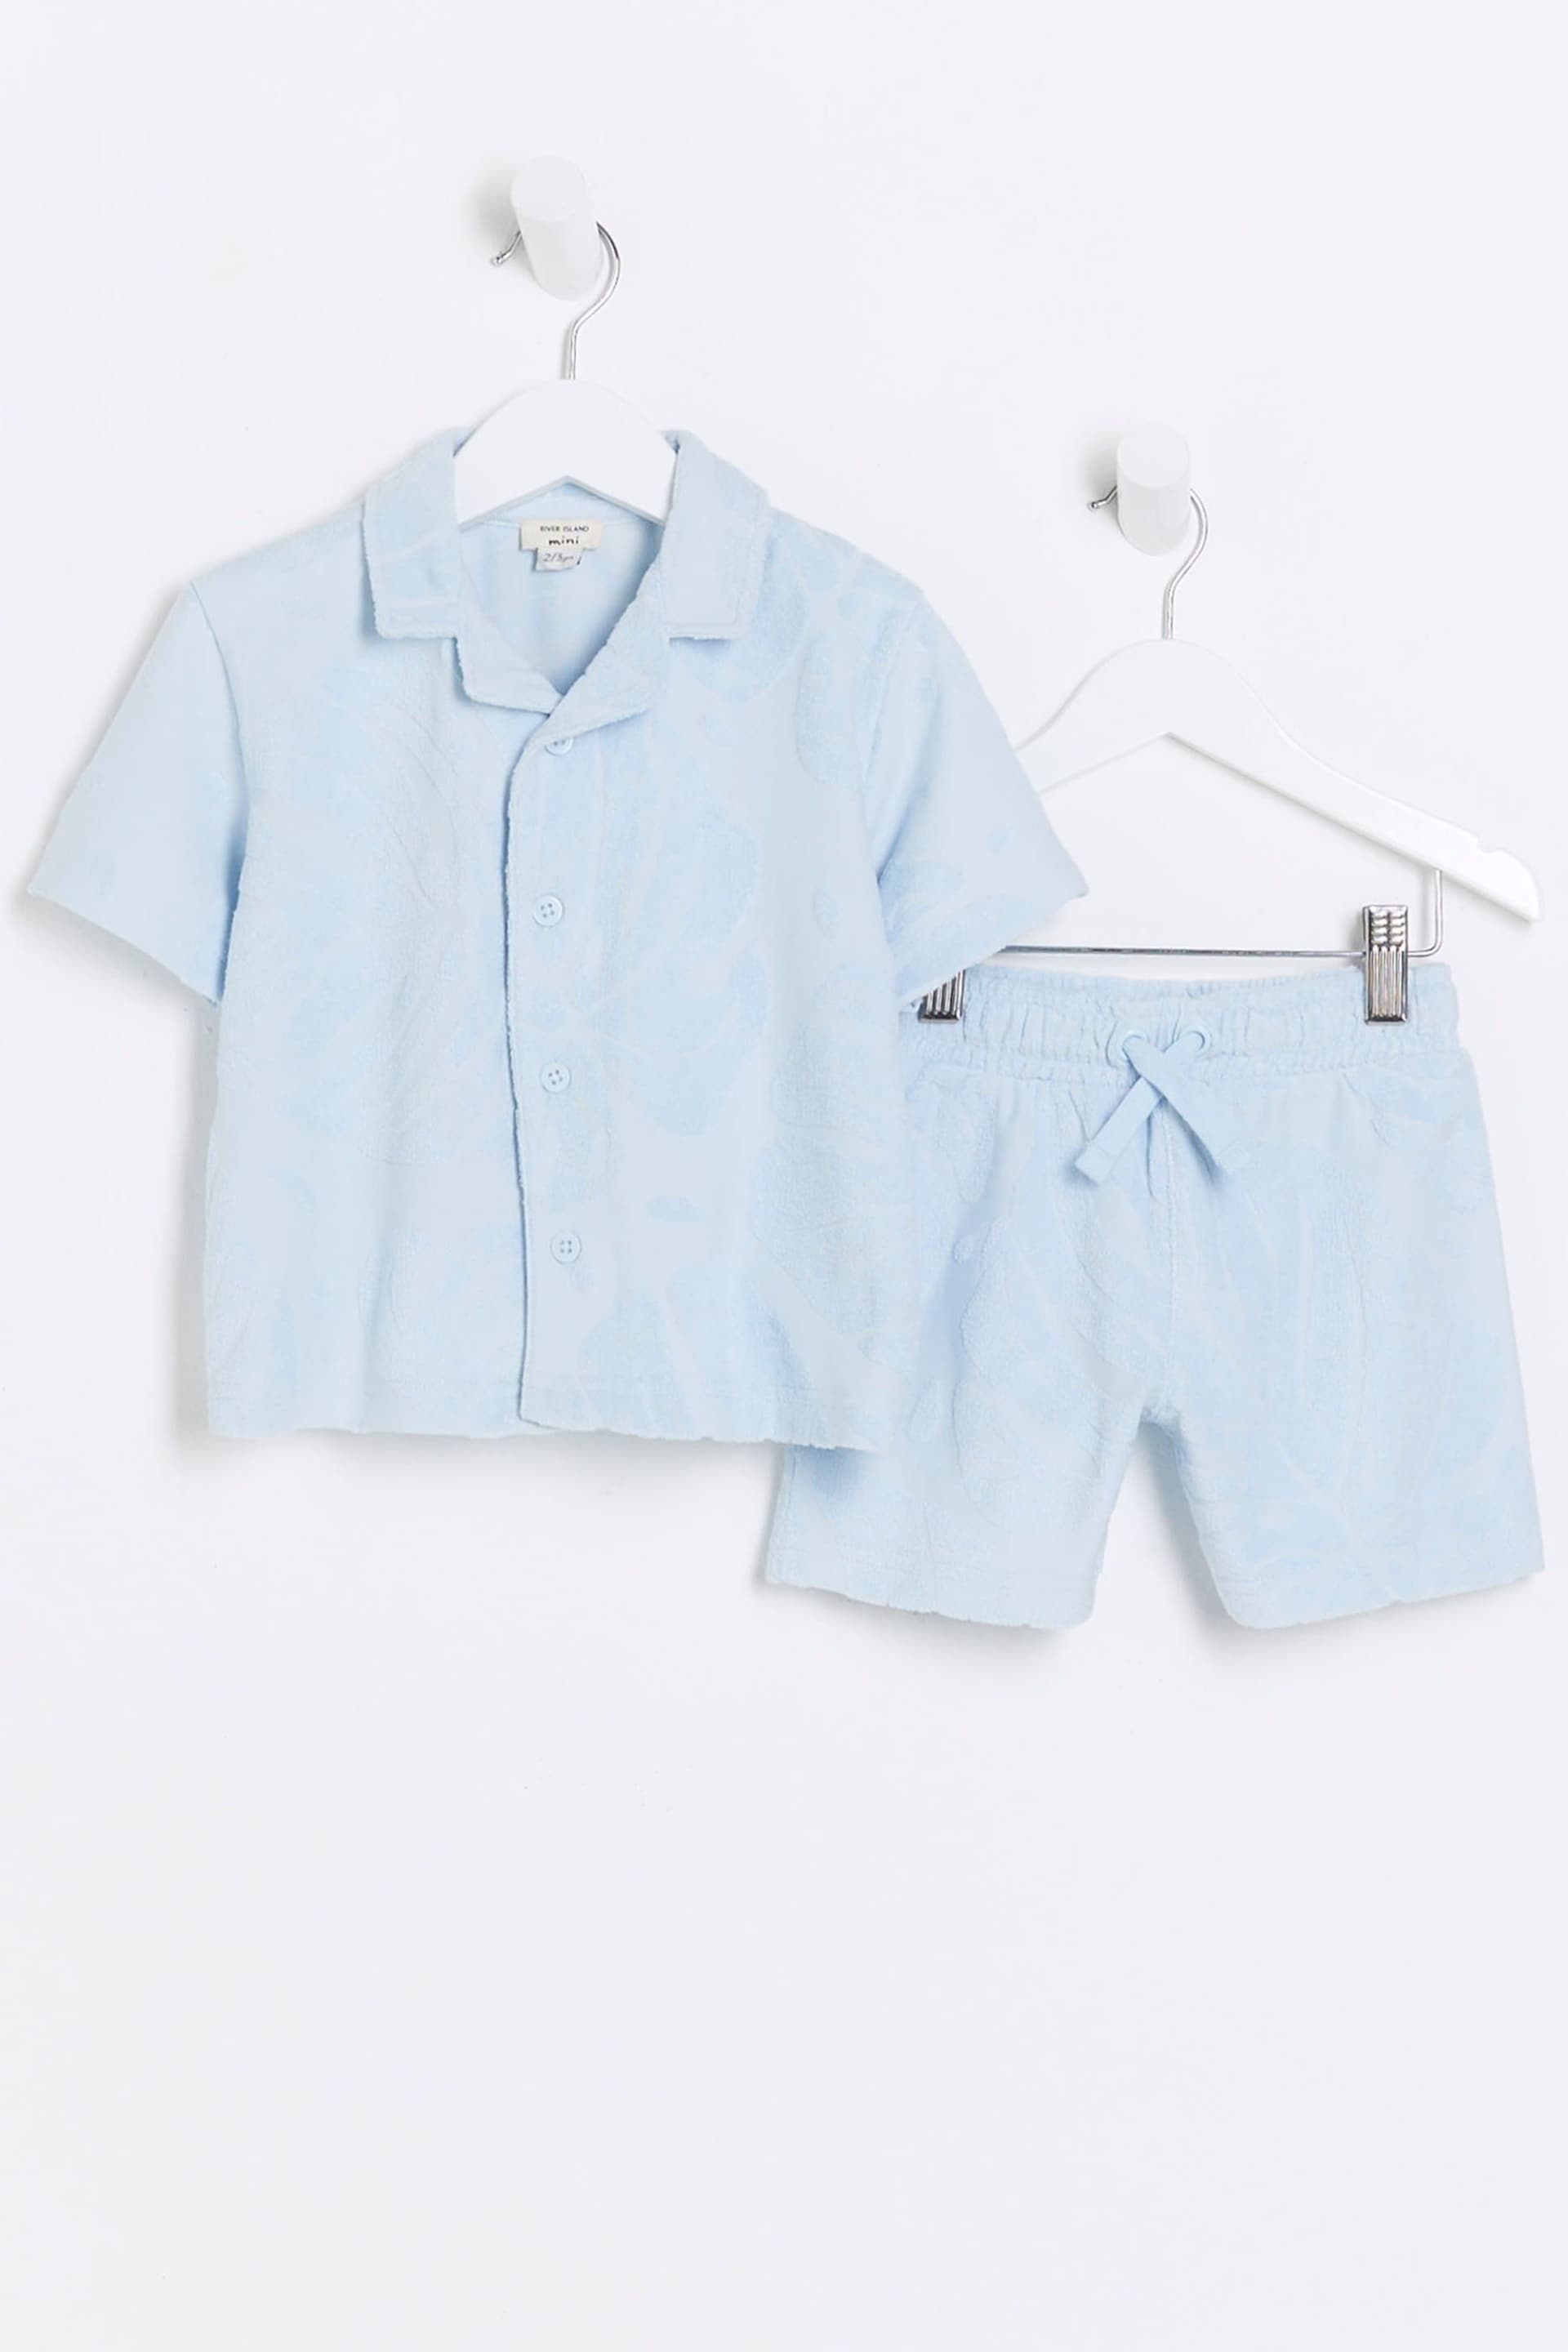 River Island Blue Boys Towelling Shirt And Shorts Set - Image 5 of 5